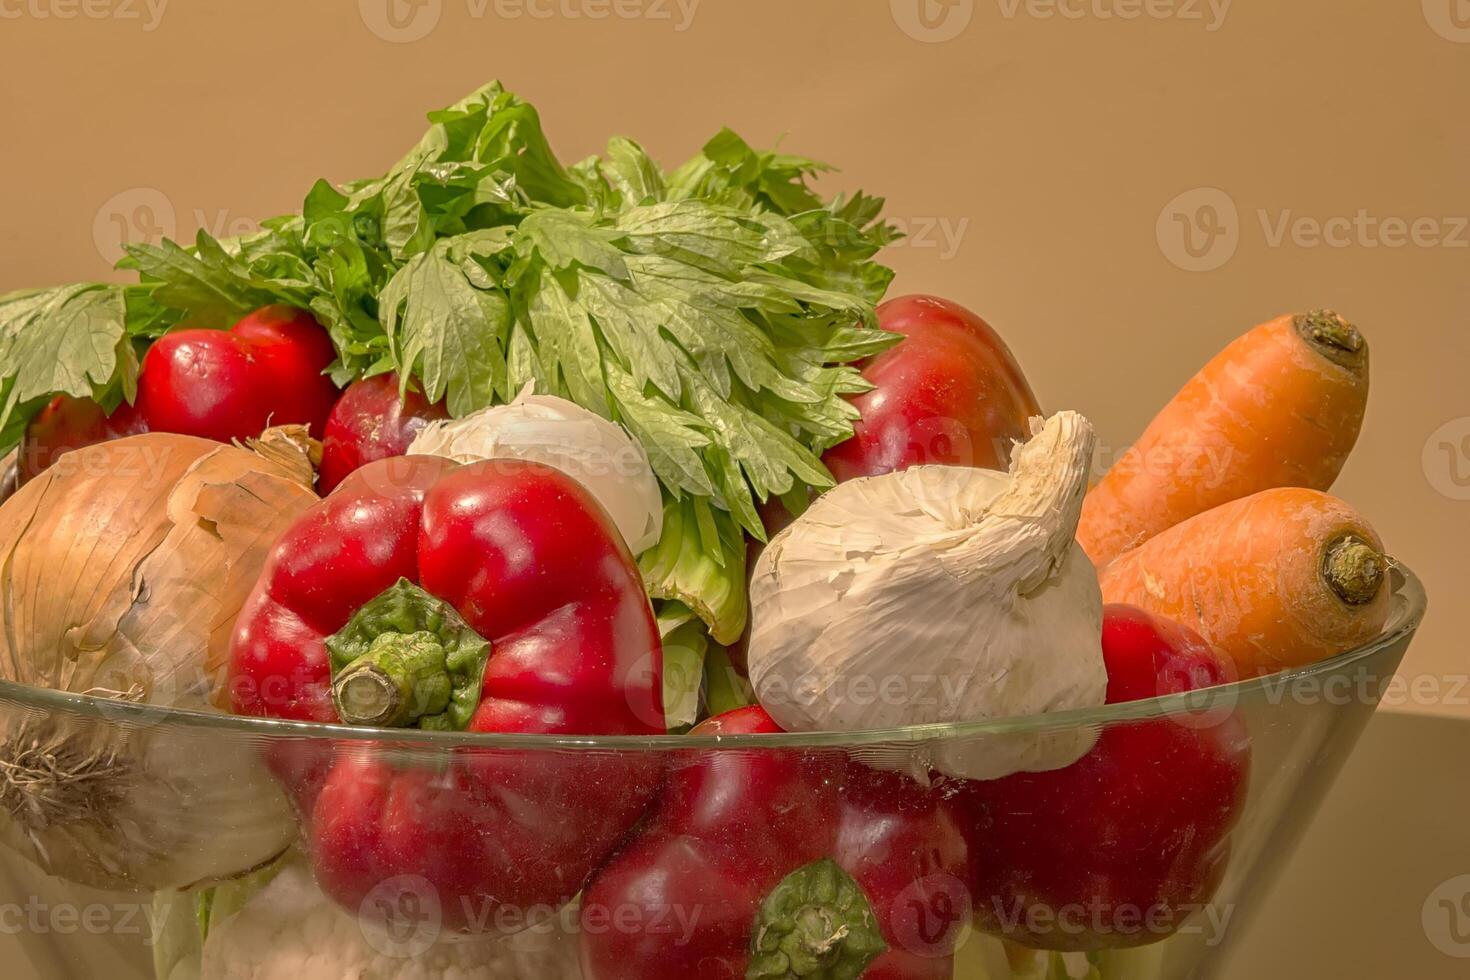 Vegetables in a bowl prepared for salad photo